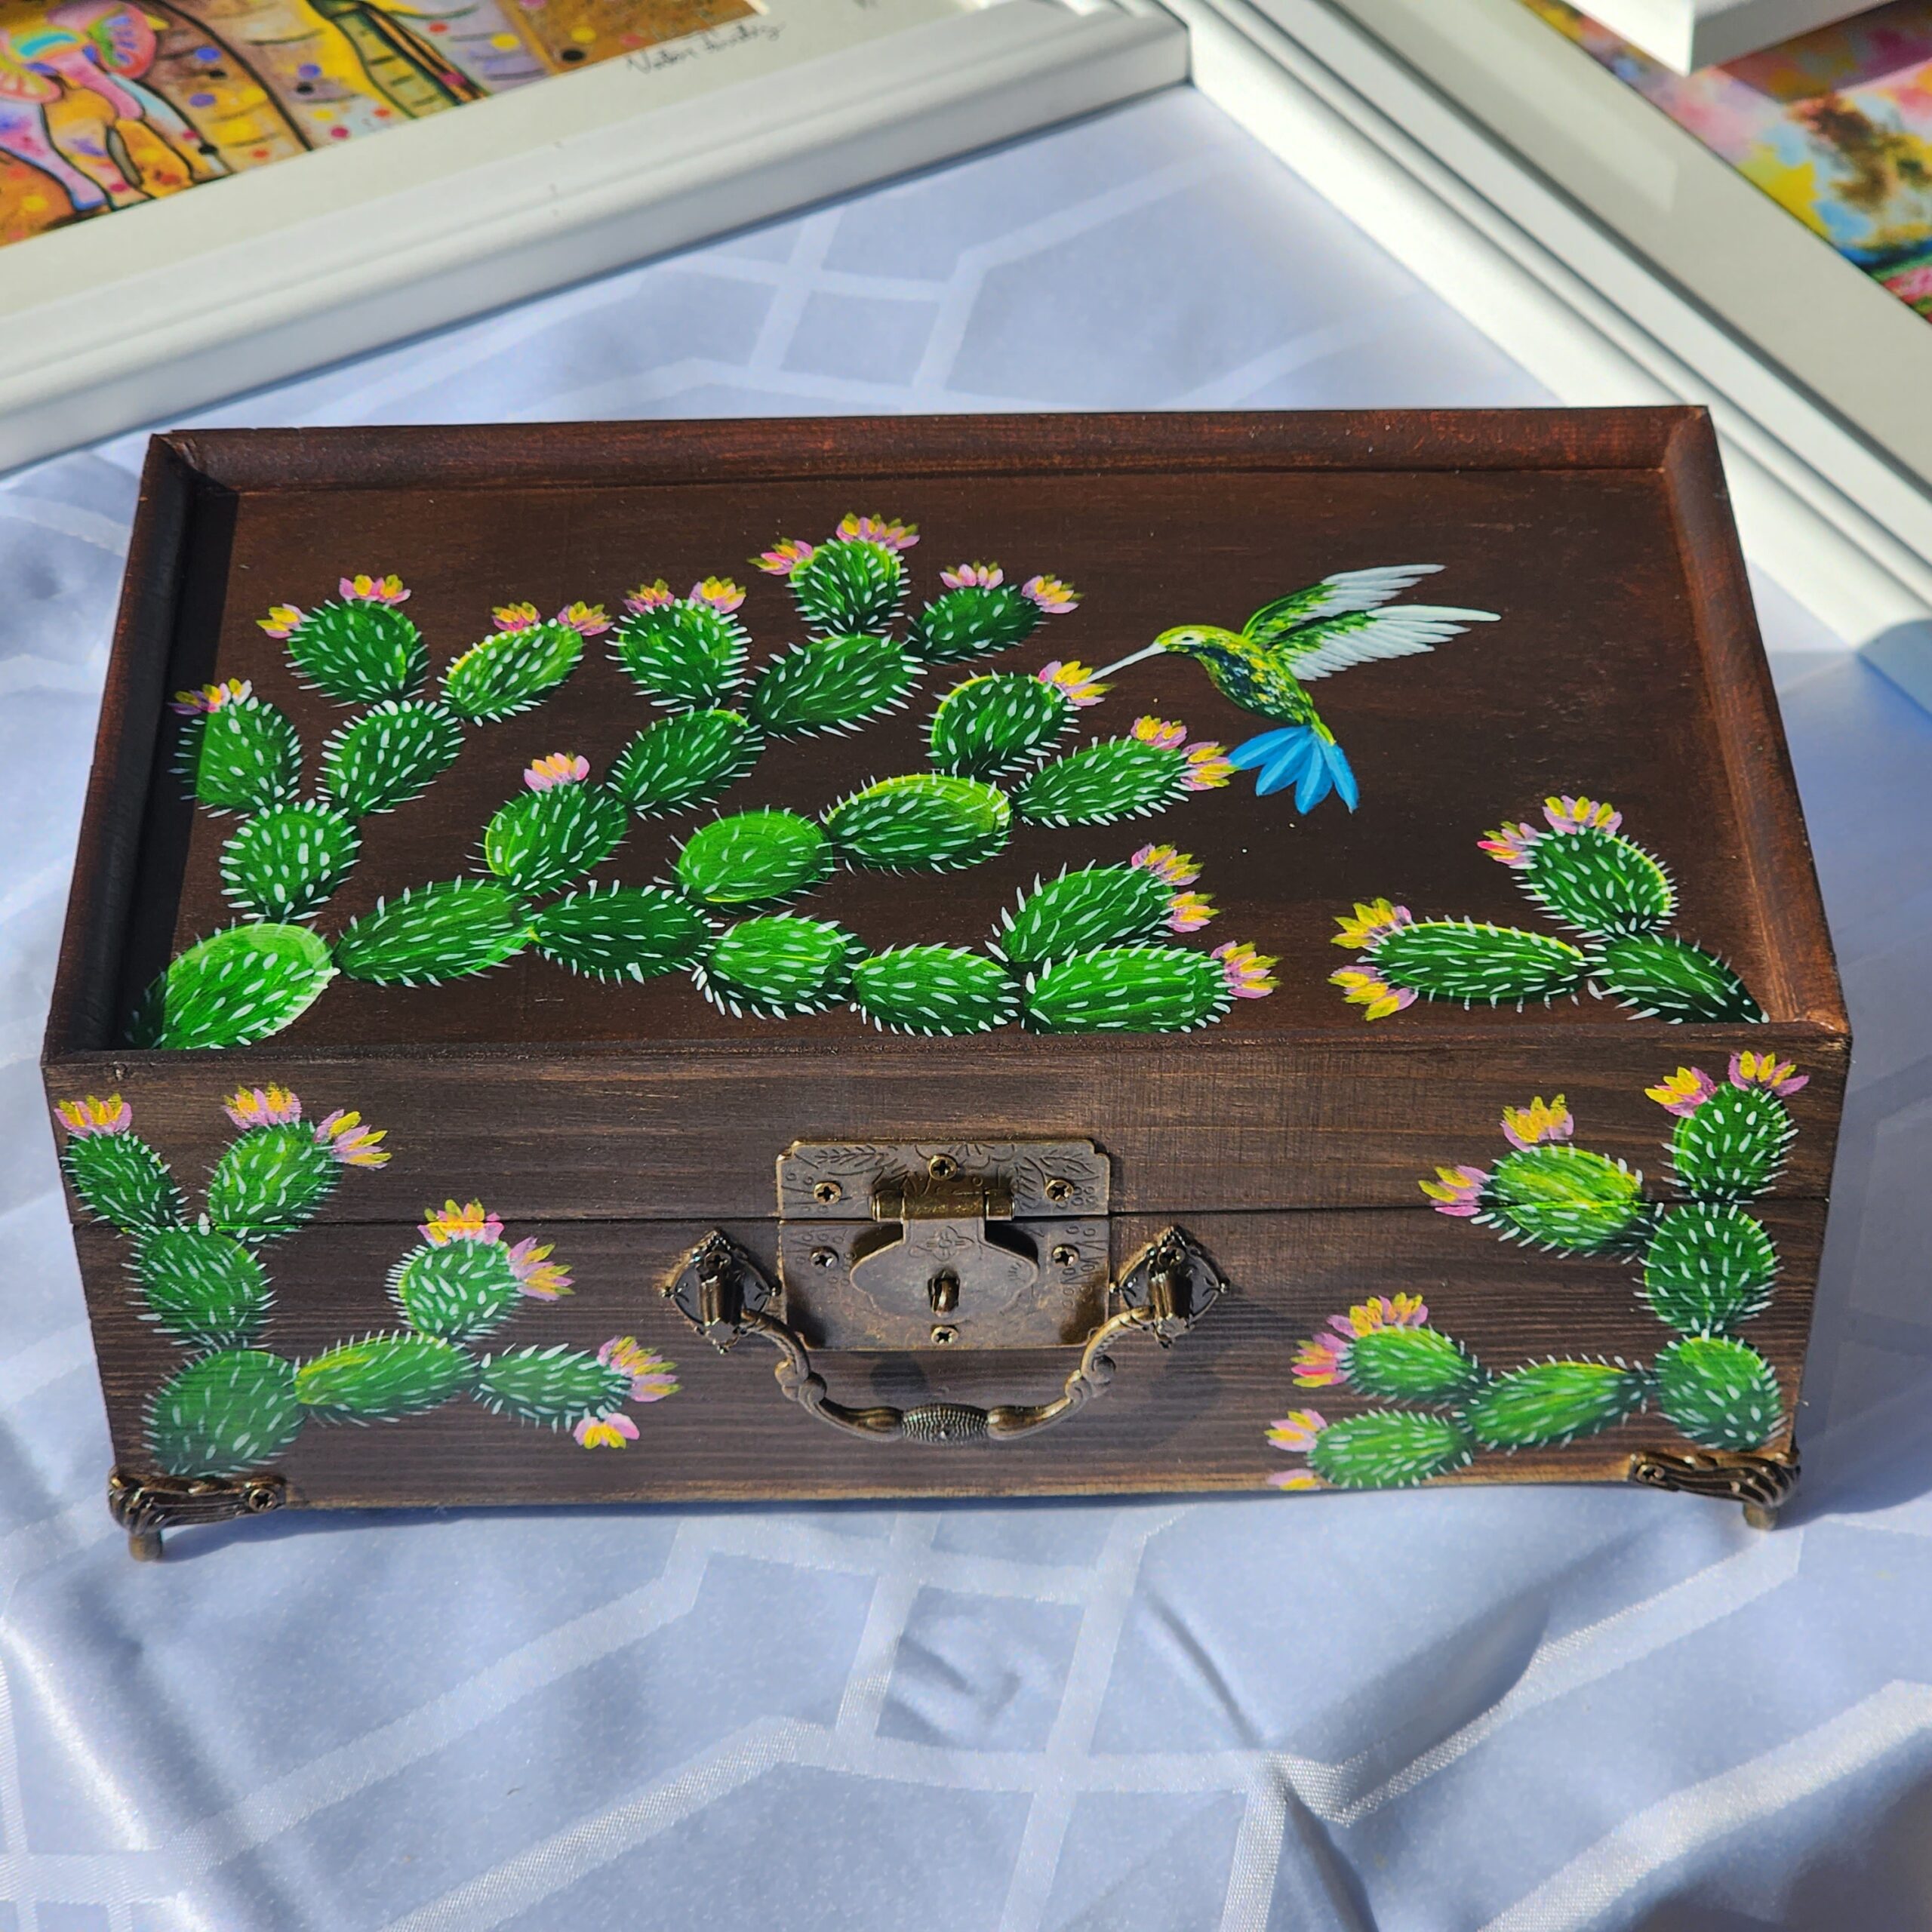 Beautiful handpainted wooden trinket box with a mirror and metal feet This cute trinket box is an ideal gift for a special loved one. You can store jewelry such as rings, necklaces, bracelets, or anything you would like to keep in a particular place, especially in this elegant and artistic trinket box.